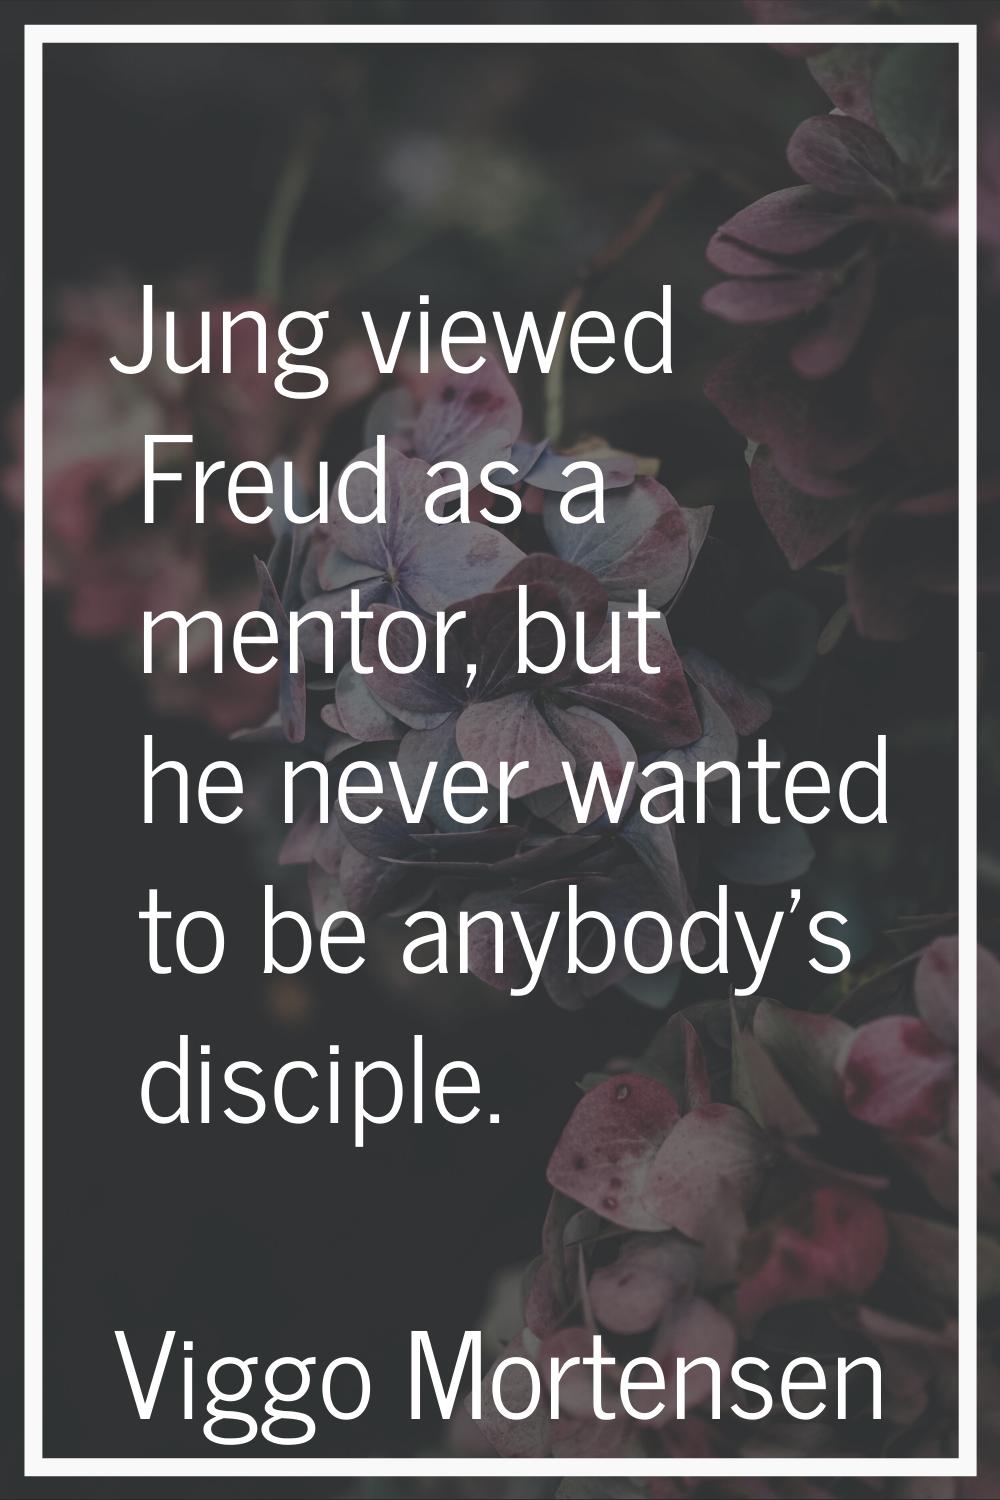 Jung viewed Freud as a mentor, but he never wanted to be anybody's disciple.